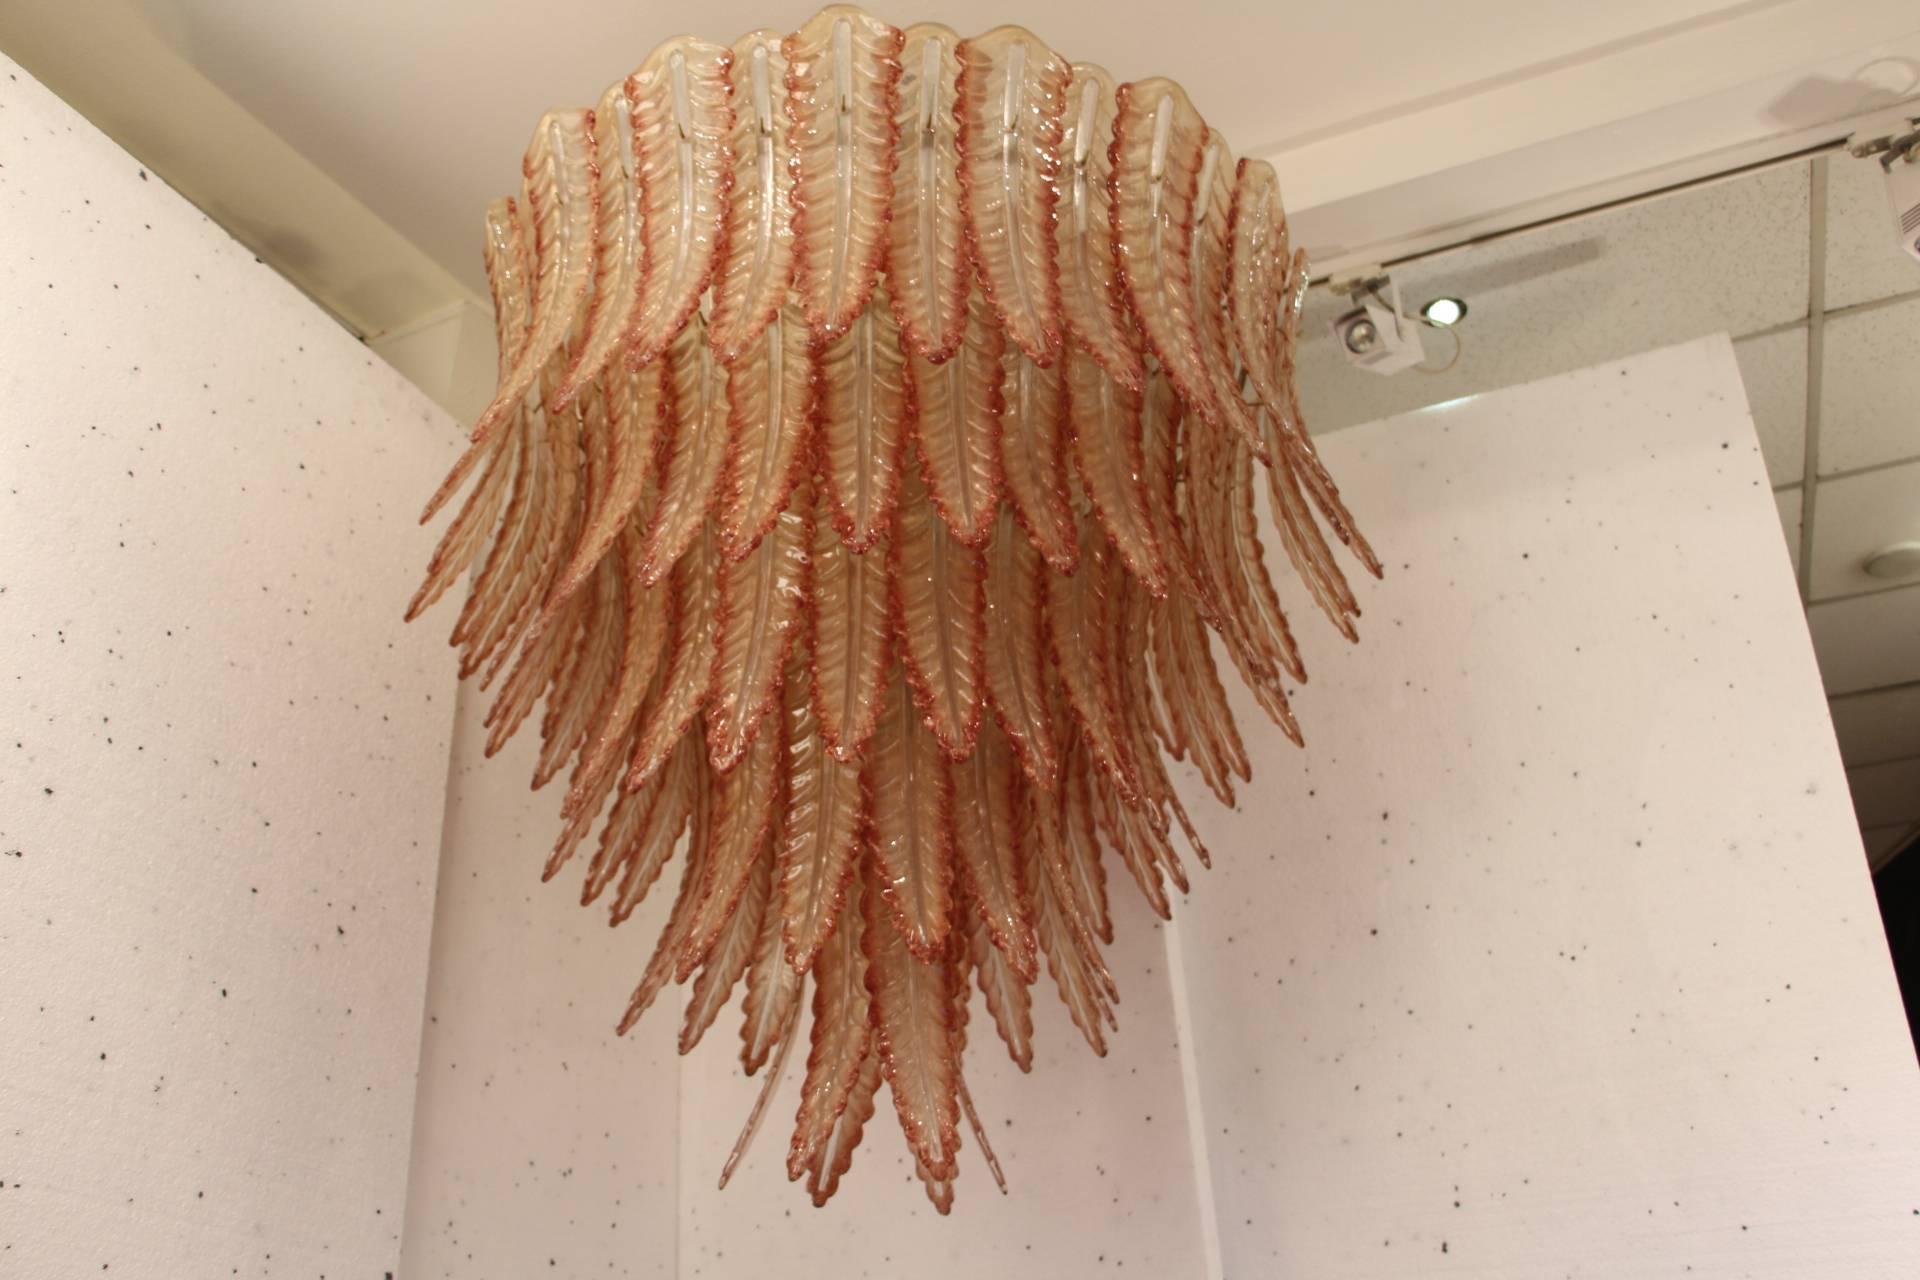 This spectacular chandelier features beautiful Murano glass palmettes in champagne beige color with red hedges. The mix of these two colors results in a kind of very warm pink general color.
It gives a warm and pleasant light and provides a